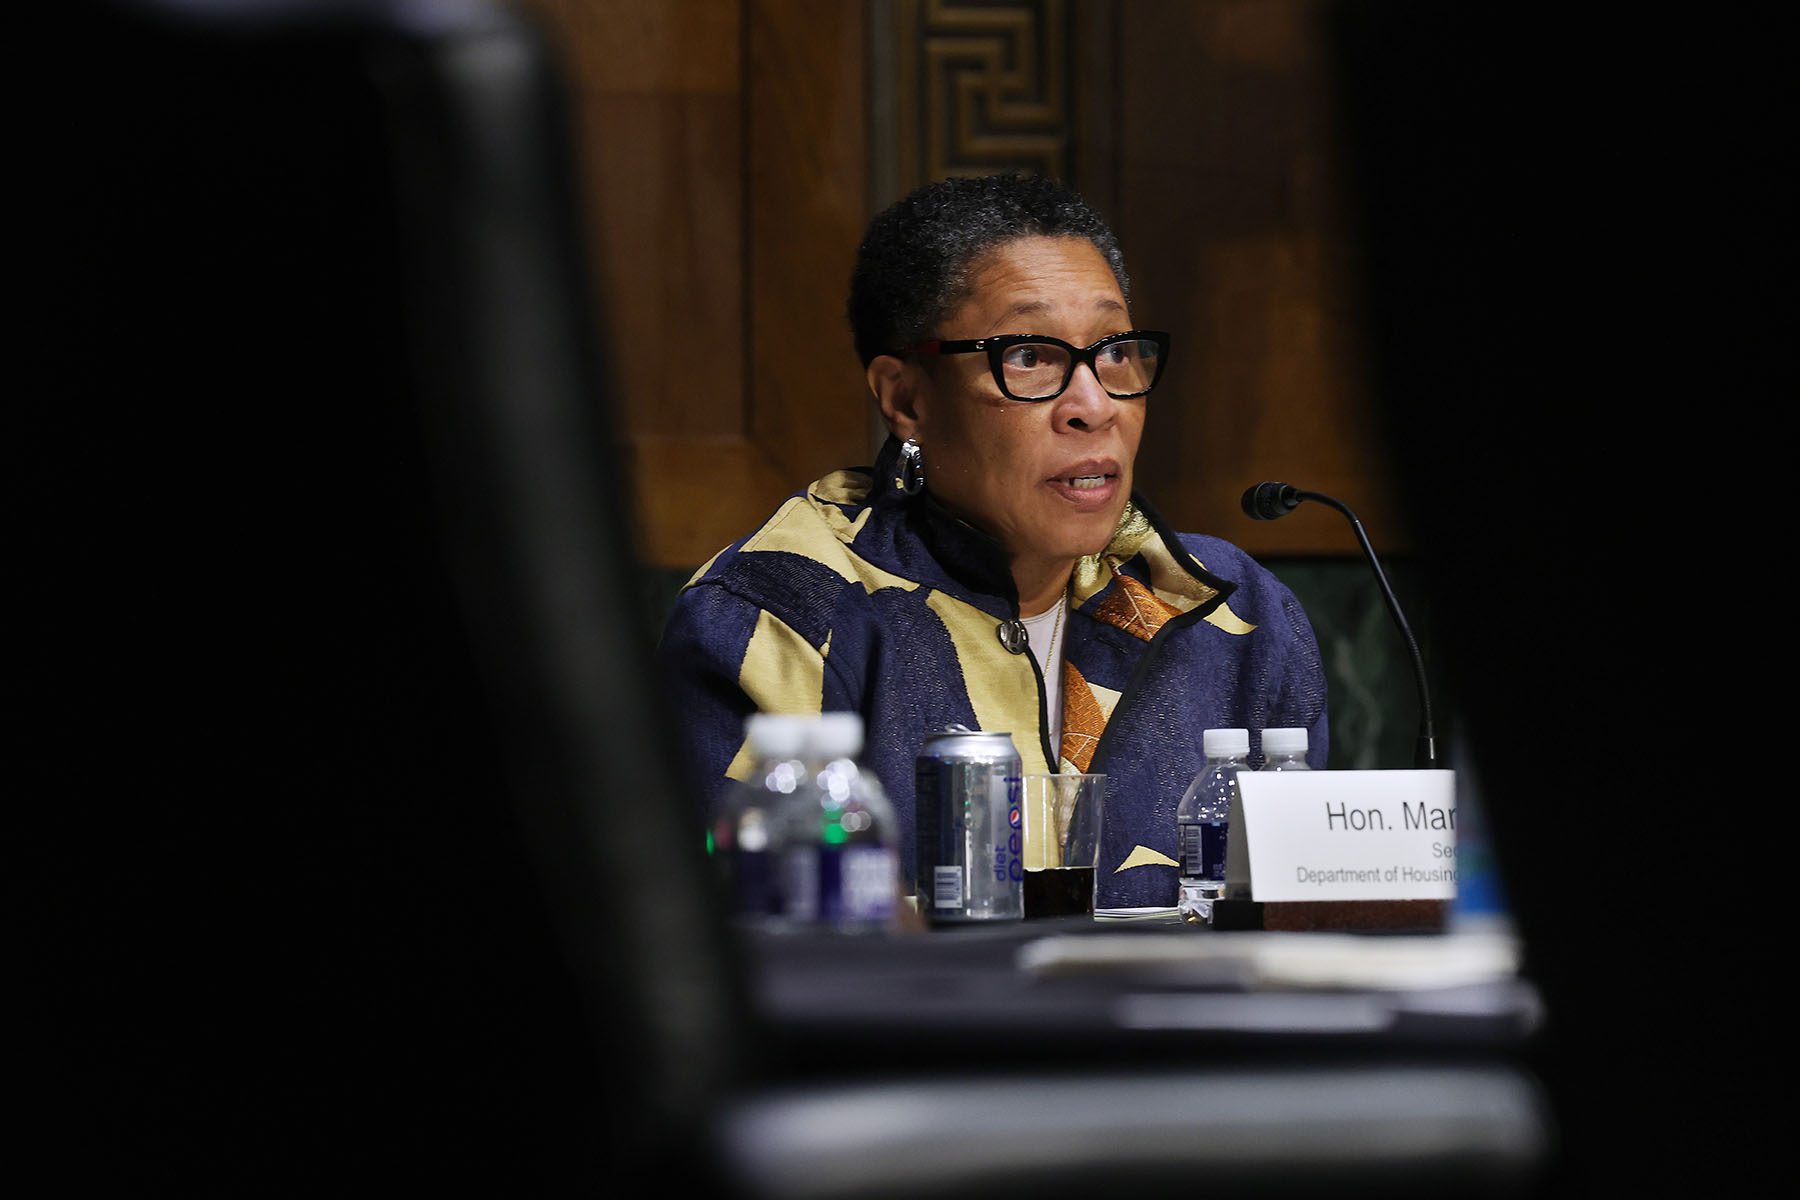 Marcia Fudge speaks into a microphone. She is framed by two empty seats in the foreground.